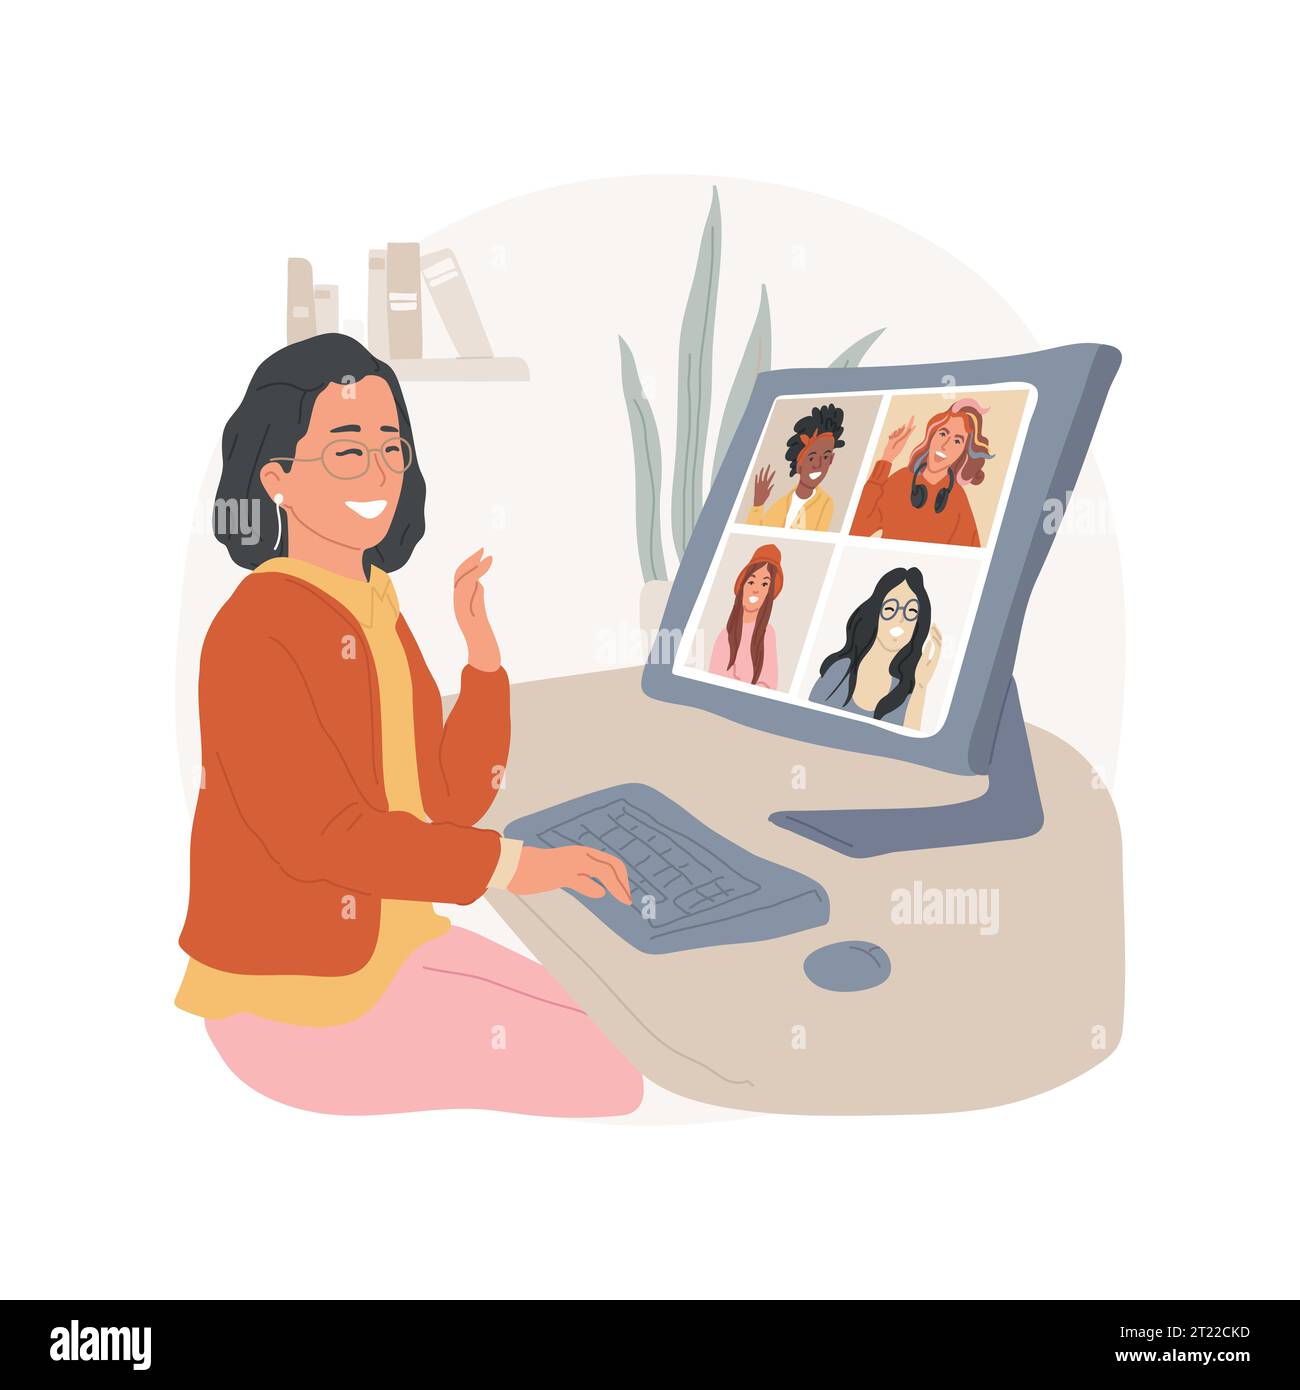 Virtual meeting room isolated cartoon vector illustration. Teen girl having communication with group of friends during live chatting via internet, online virtual meeting vector cartoon. Stock Vector